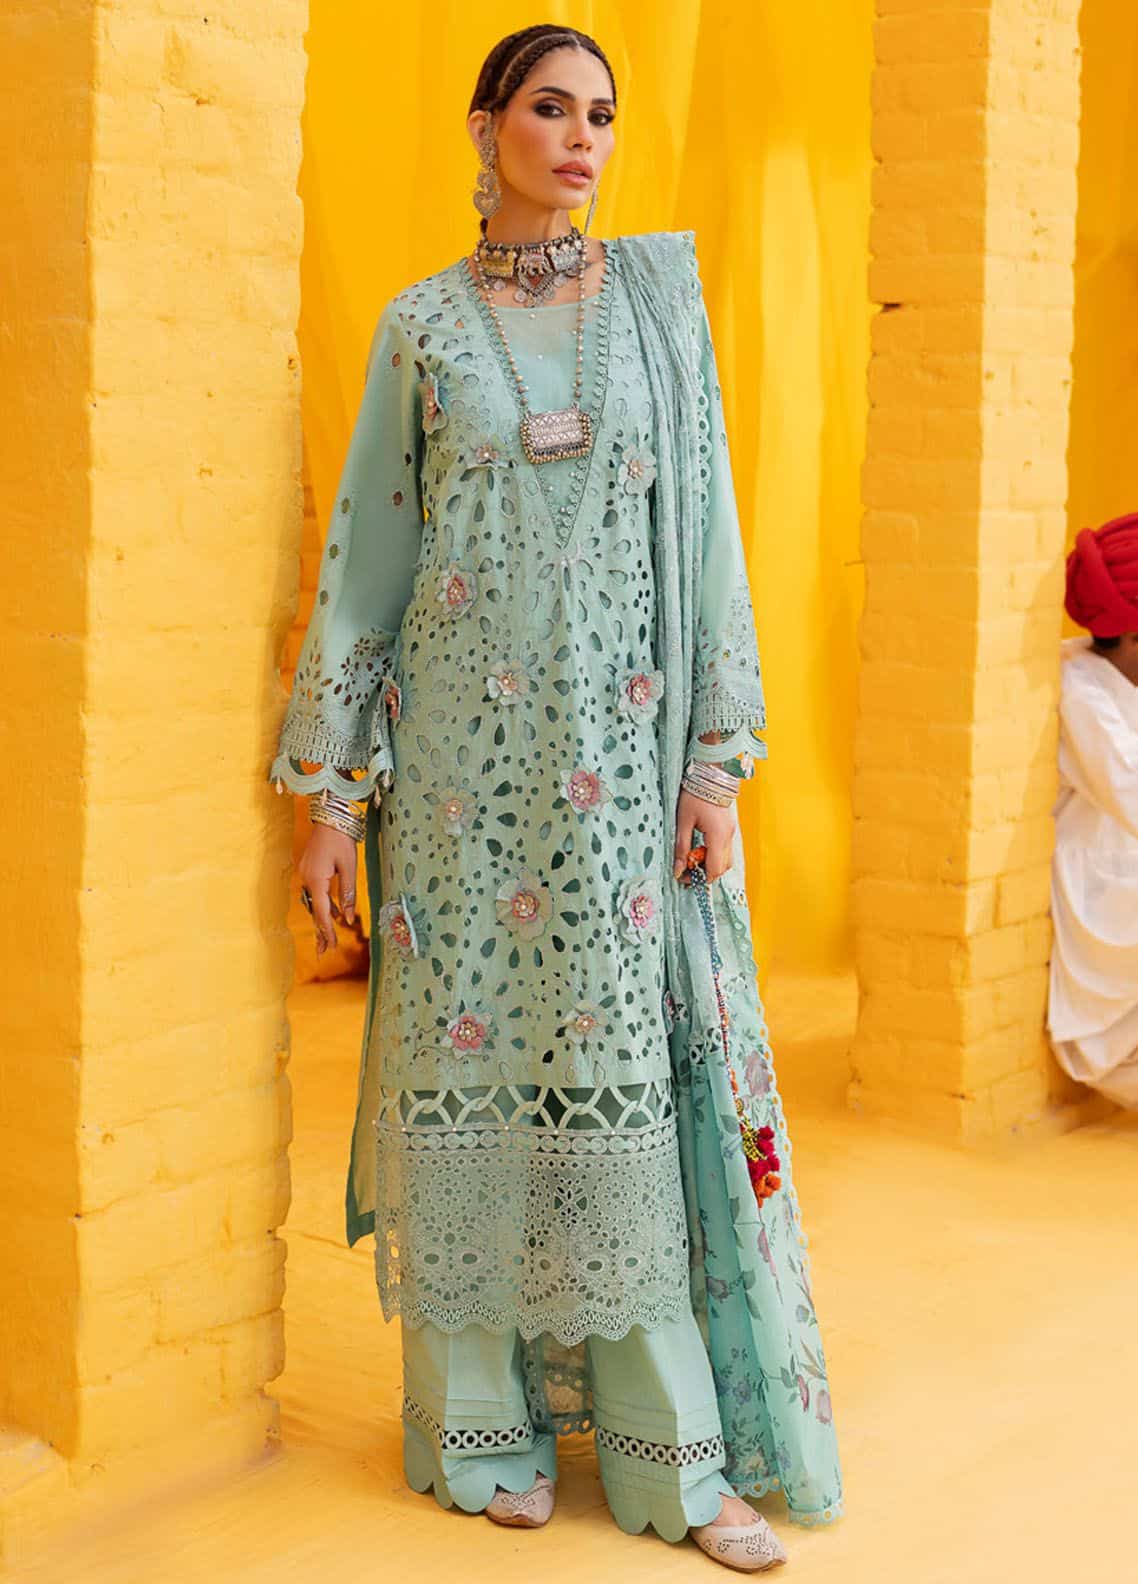 Mela by nureh embroidered lawn | nds-102